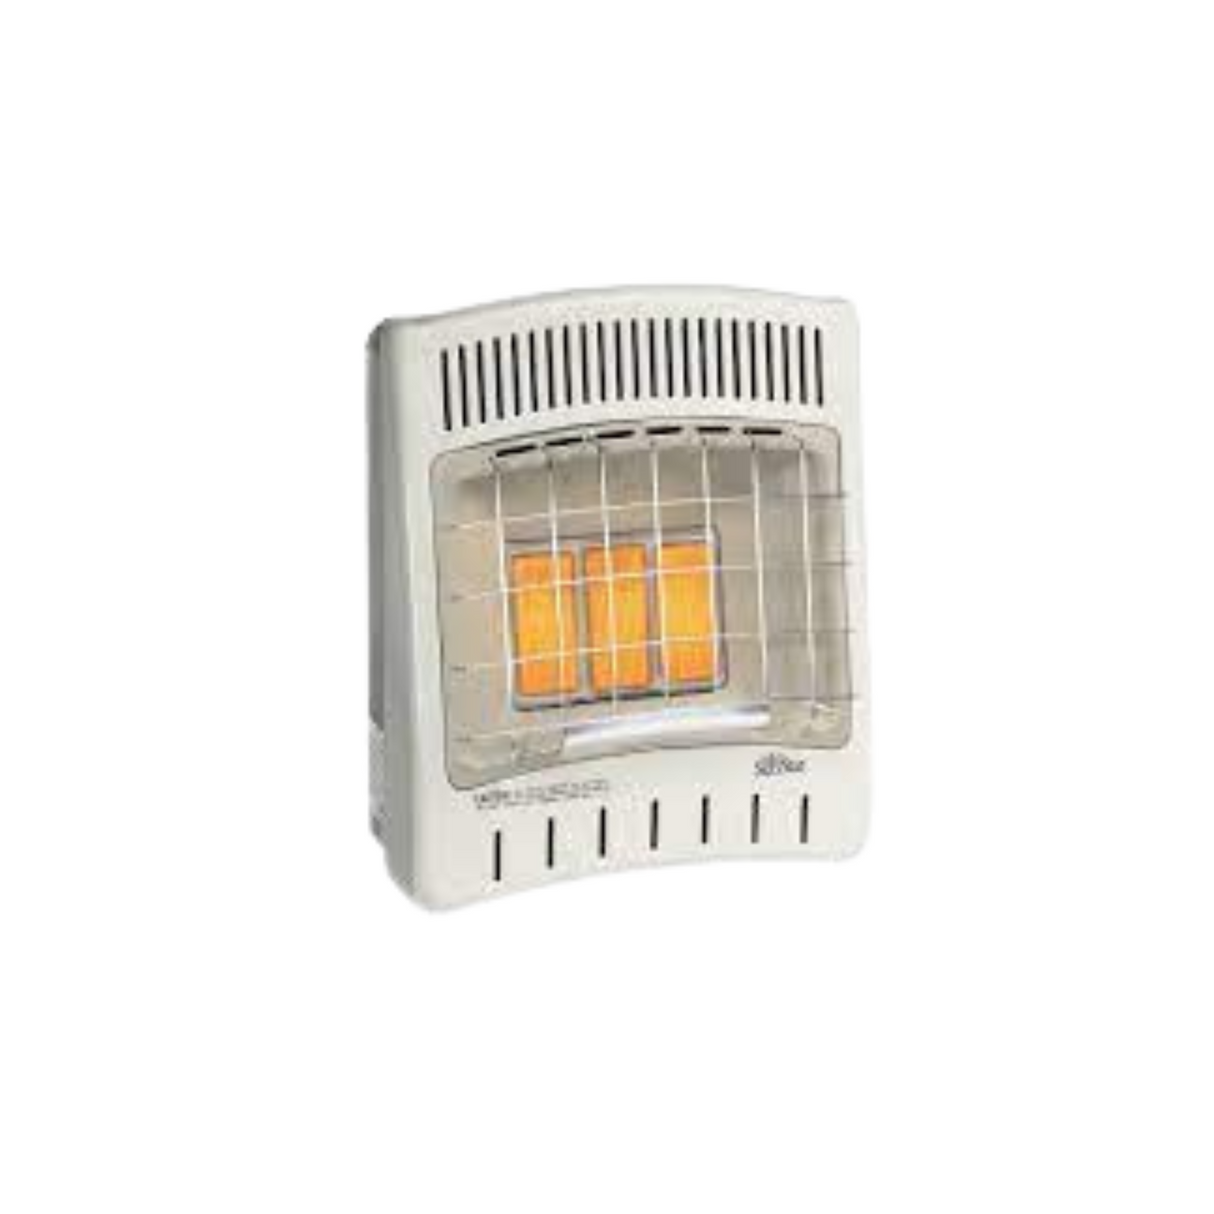 Sunstar Heating Products SC18M-LP 16500 BTU Vent Free Infrared/Radiant Manual Heater, LP Gas